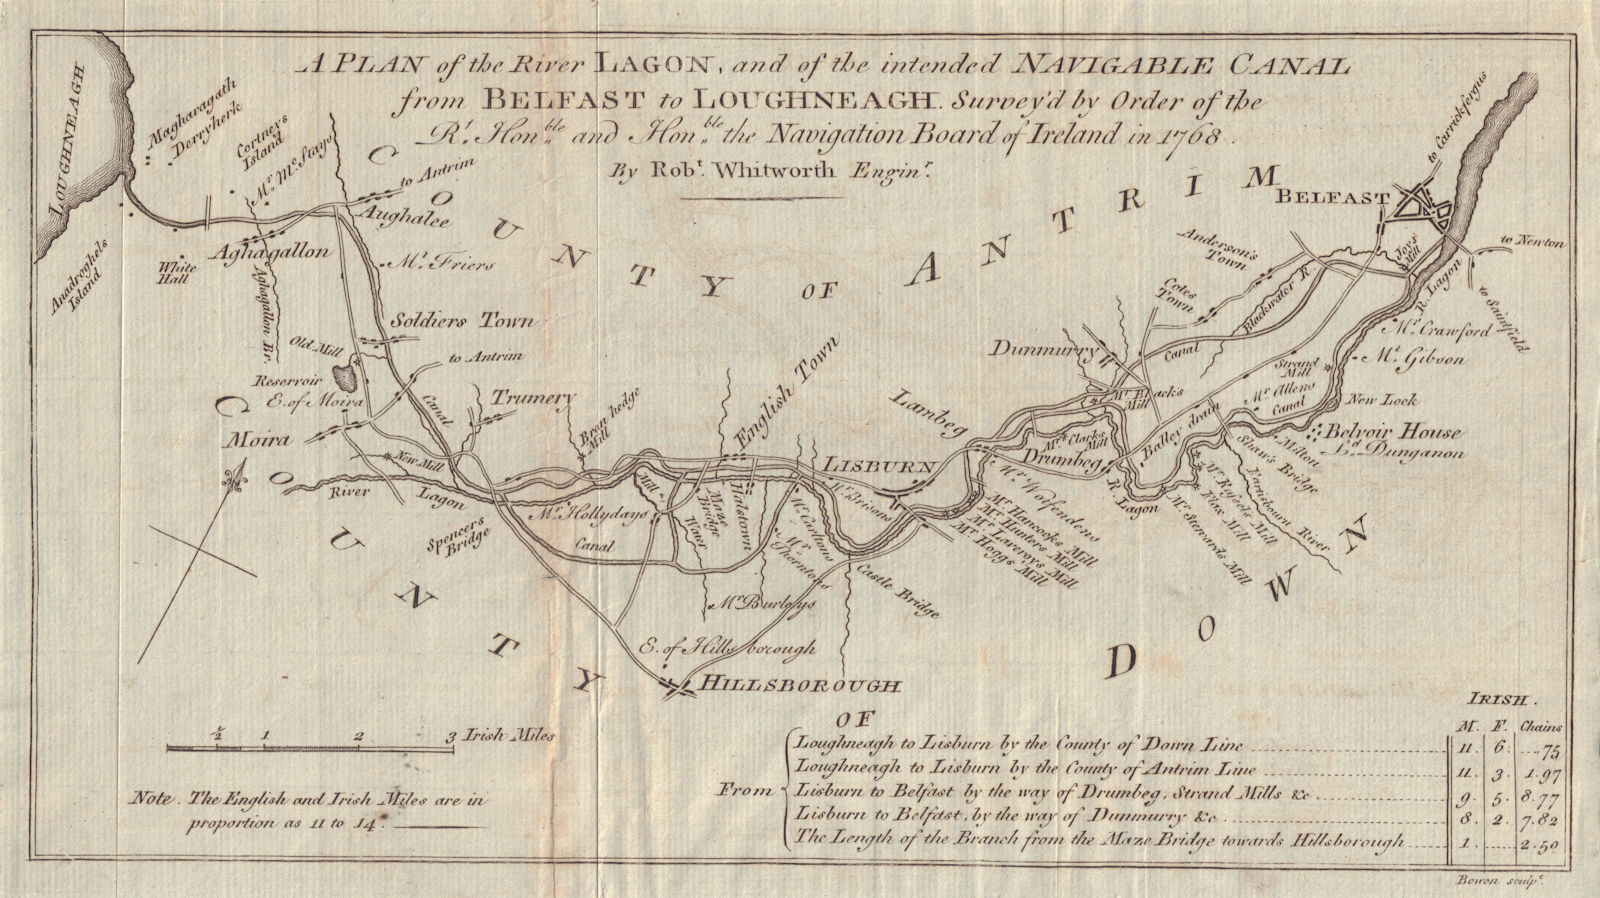 Associate Product River Lagon & the intended… canal from Belfast to Loughneagh. BOWEN 1778 map